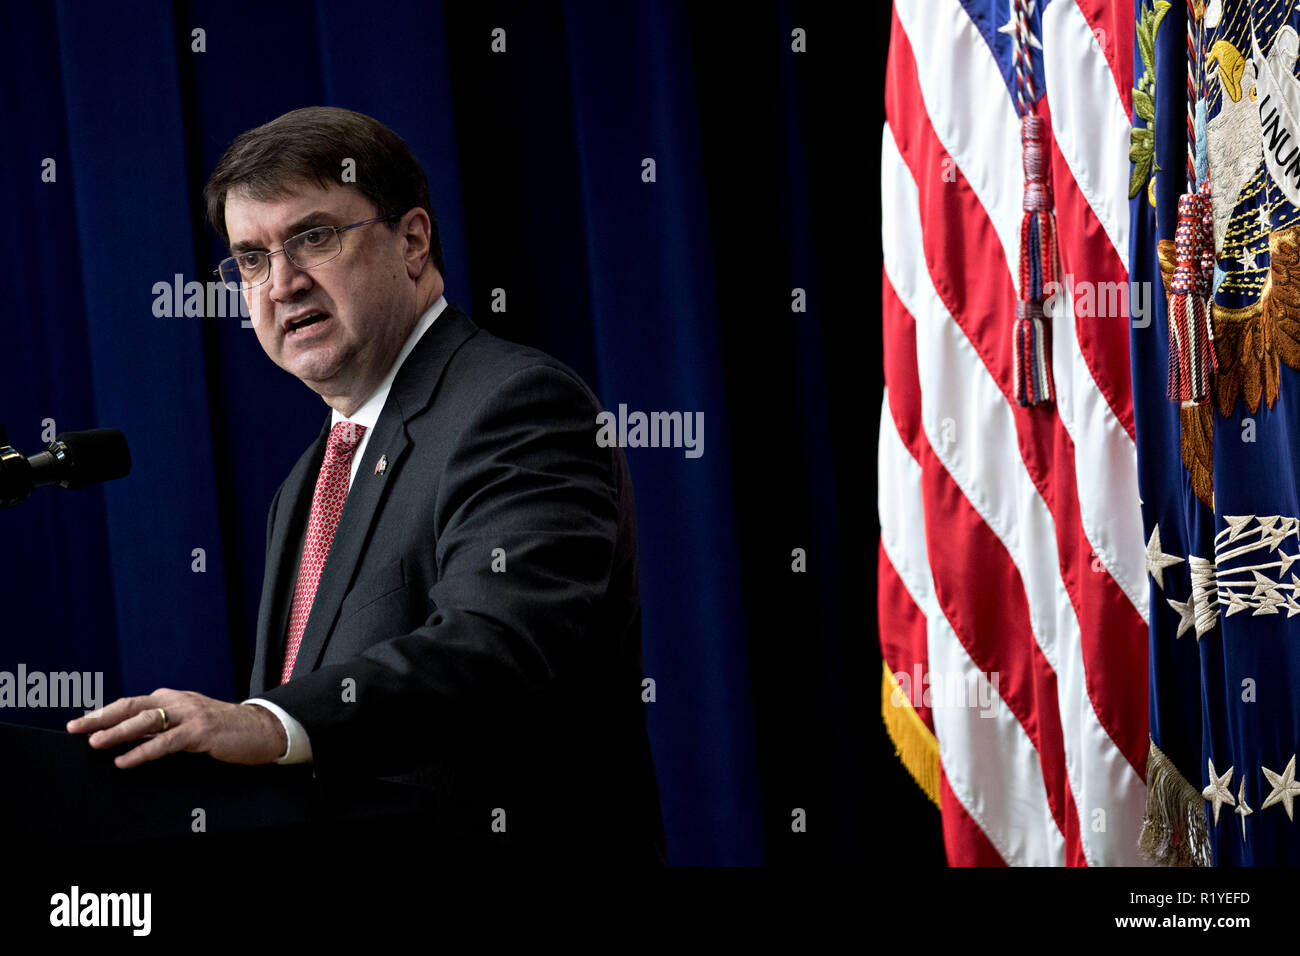 United States Secretary of Veterans Affairs (VA) Robert Wilkie speaks during an event supporting veterans and military families in the Eisenhower Executive Office Building in Washington, D.C., U.S., on Thursday, Nov. 15, 2018. US President Donald J. Trump today accused Robert Mueller of 'threatening' witnesses to cooperate in the probe into Russian meddling in the U.S. presidential election, one day after the Senate's Republican leader blocked a bid to protect the special counsel's work.  Credit: Andrew Harrer / Pool via CNP | usage worldwide Stock Photo